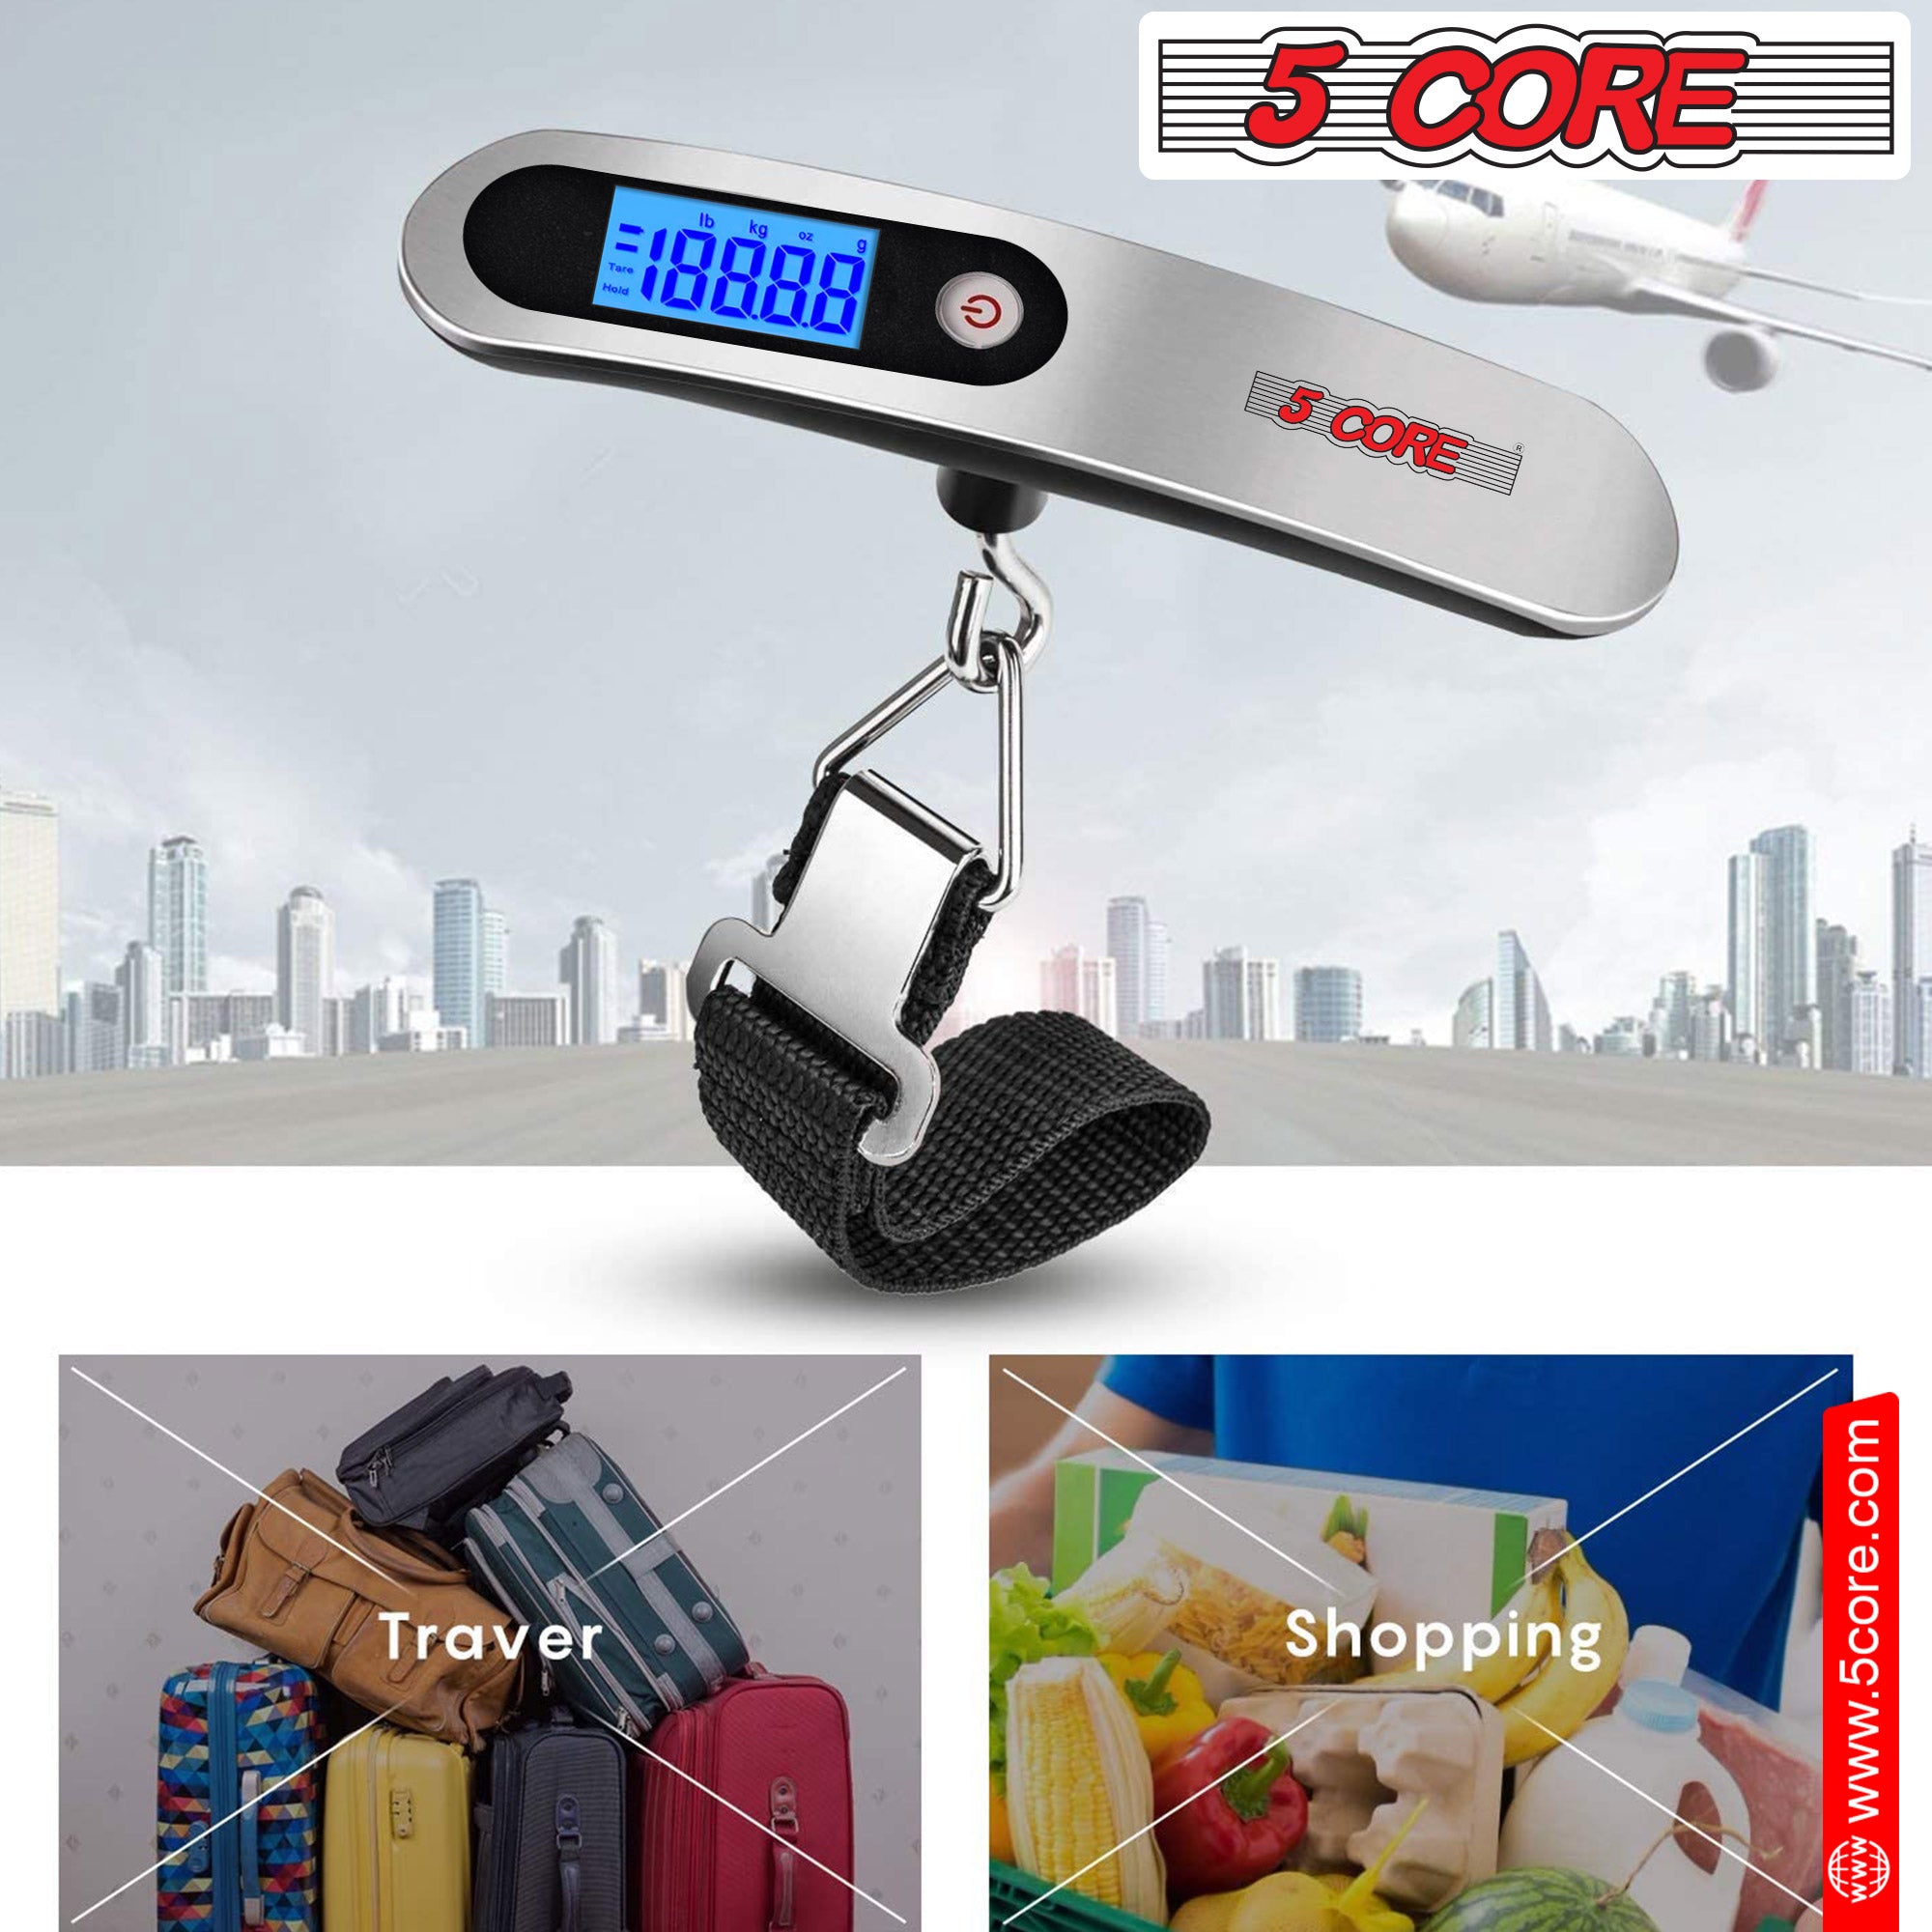 5 Core Luggage Scale 110lbs Capacity Digital Travel Weight Scale • Hanging Baggage Weighing Machine